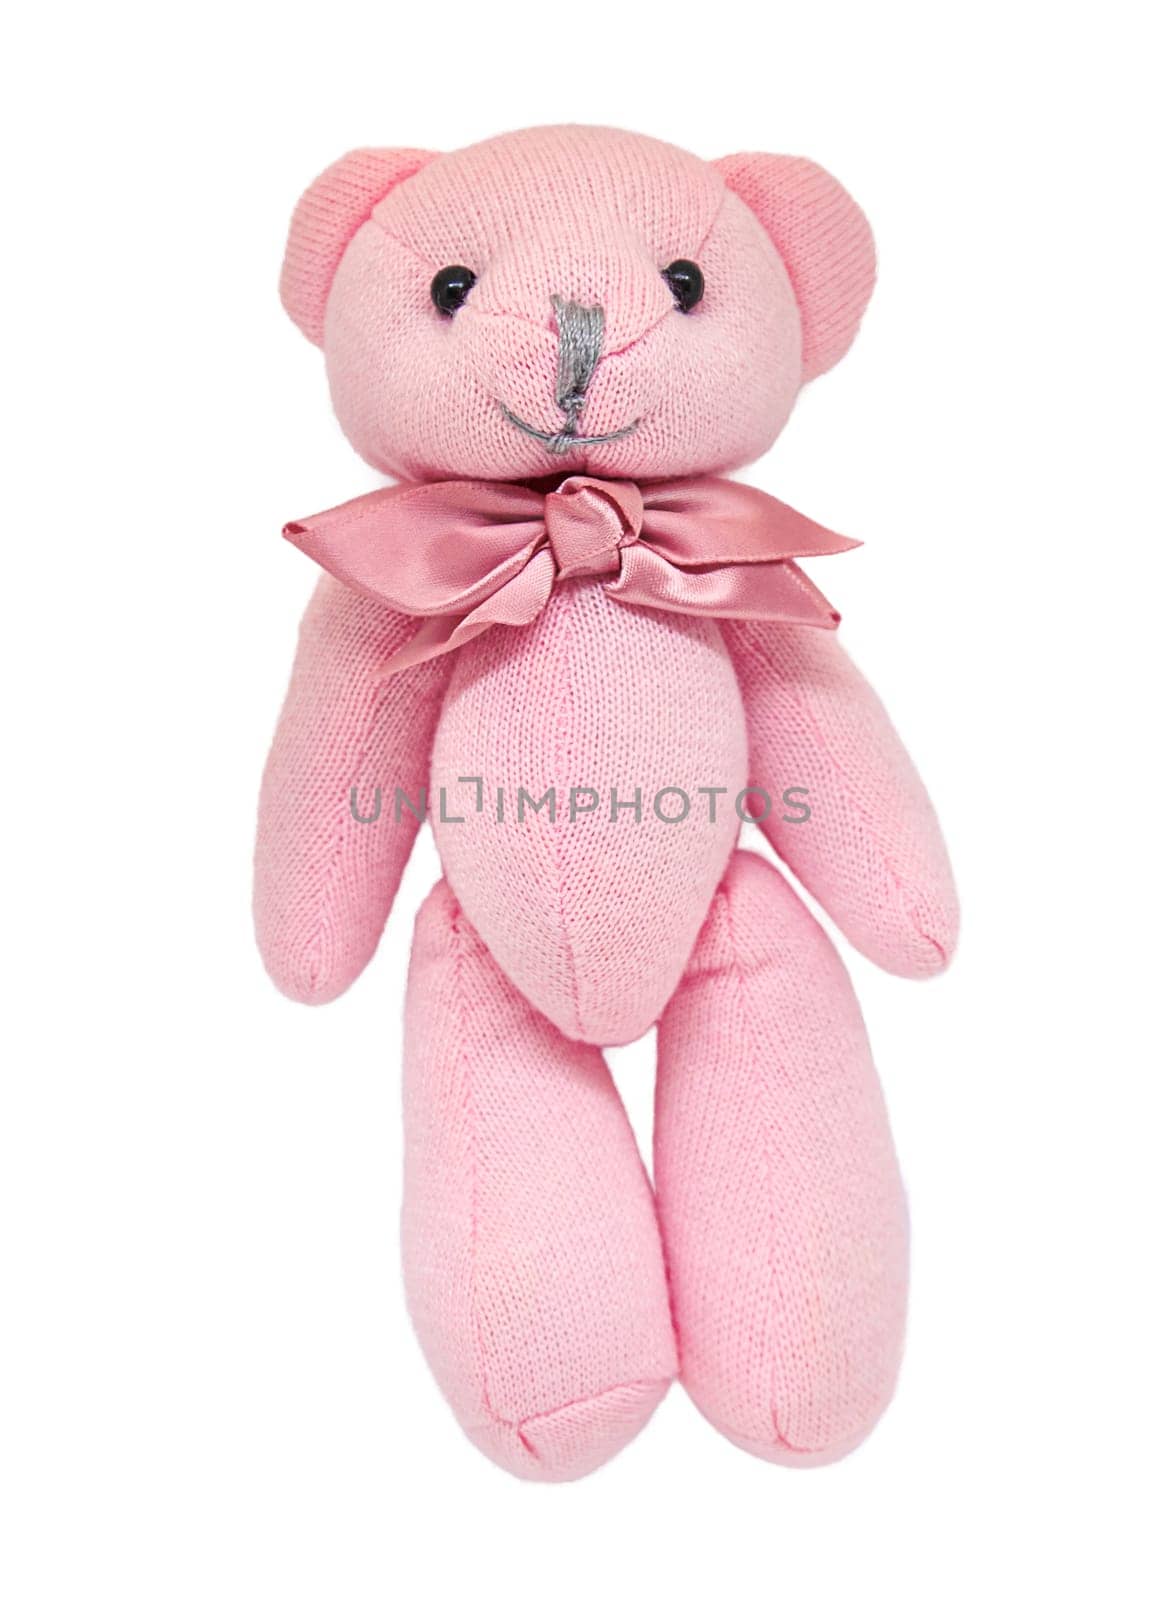 Teddy bear pink isolate on a white background. Selective focus. Baby.